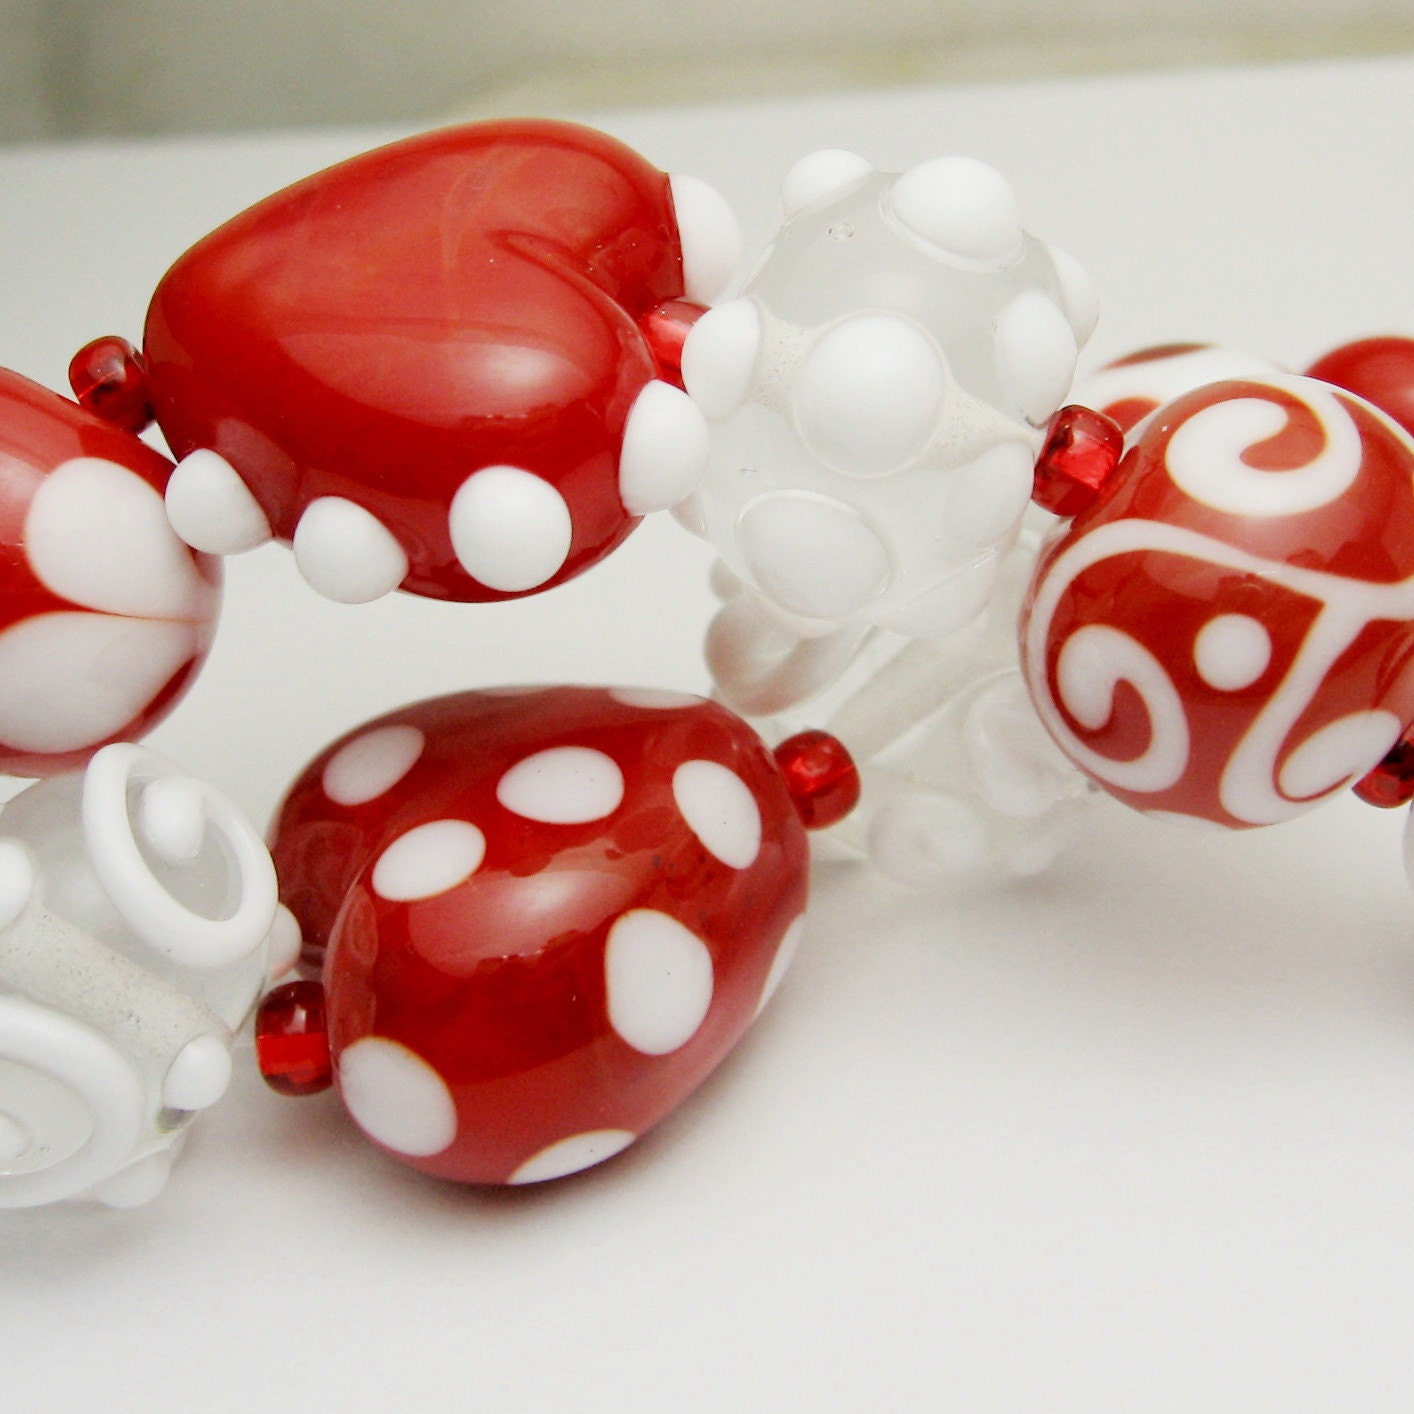 SRA Lampwork Glass Valentine Beads,Red and White, Hearts, 'True Love' - StoneDesignsbySheila